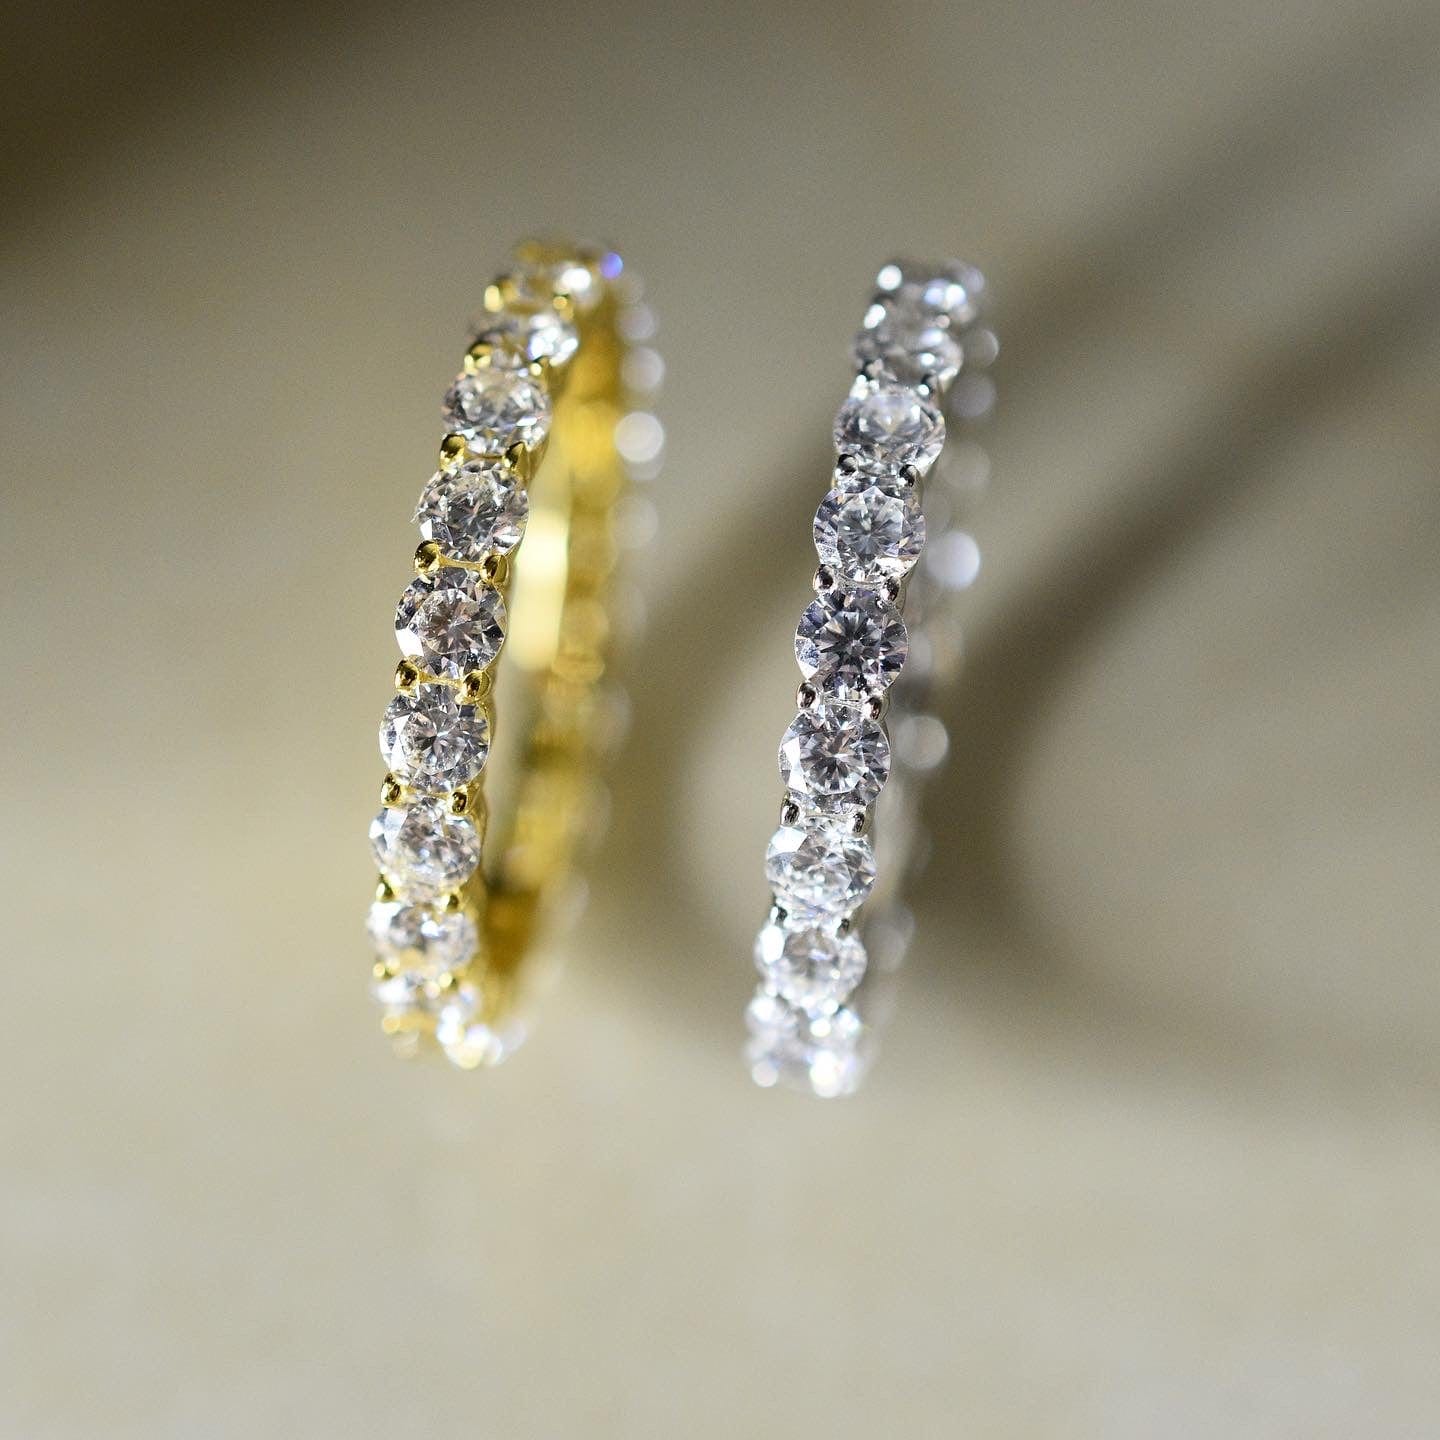 S925 Eternity Ring 3MM (Gold)